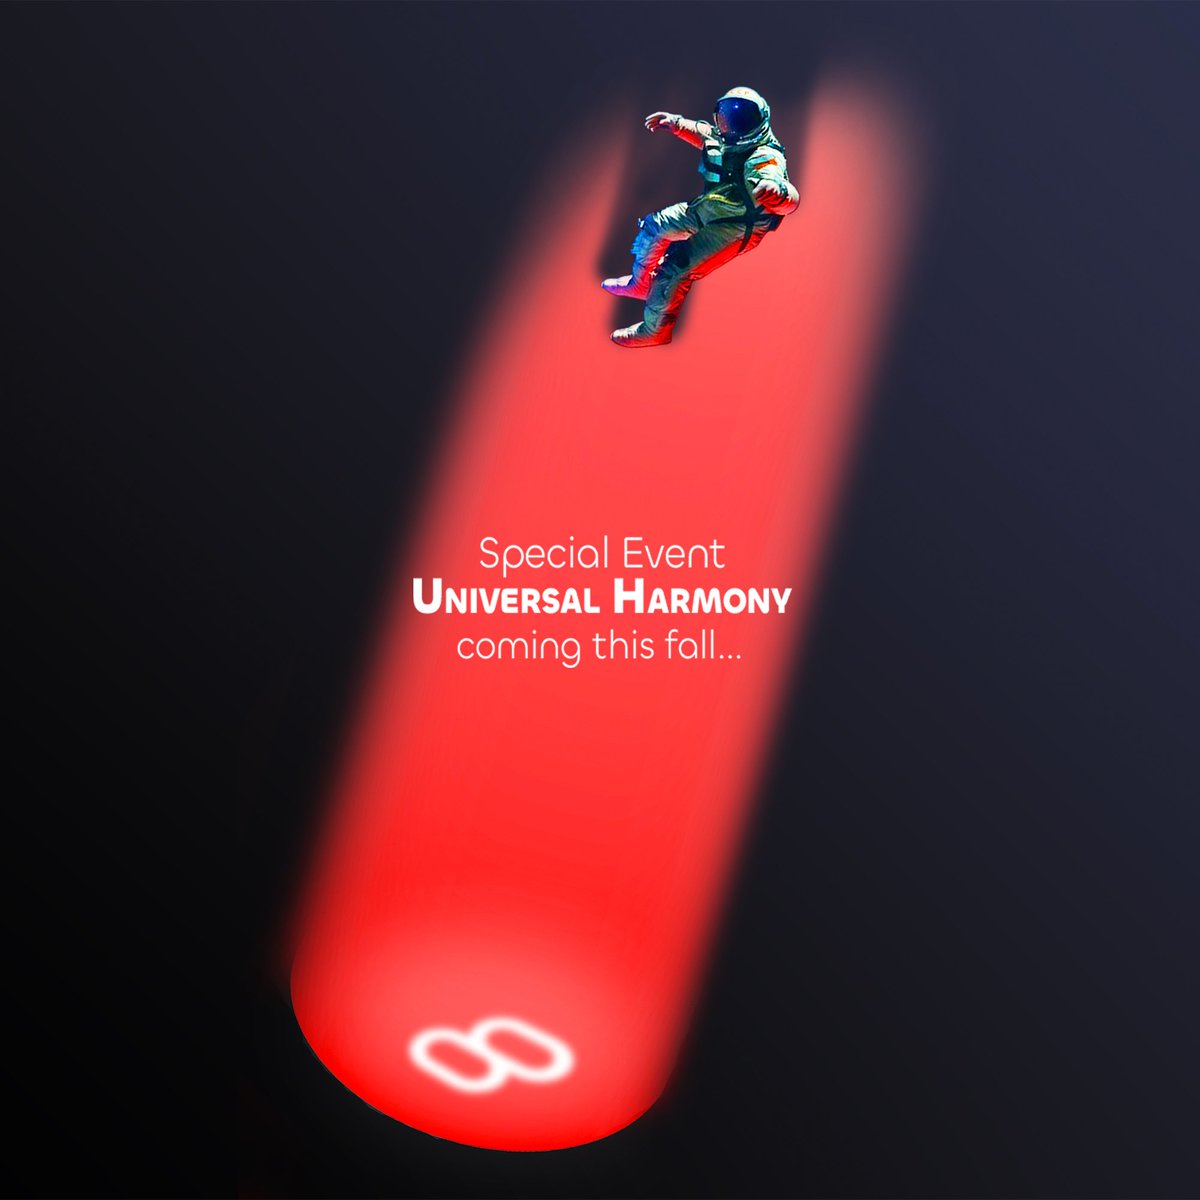 Embark on a cosmic journey unlike any other! 📷📷 Join us this fall for Mymanu's special event ‘Universal Harmony’ - an extraordinary event that transcends boundaries and embraces the wonders of the world. events.mymanu.com #UniversalHarmony #MymanuEvents #event